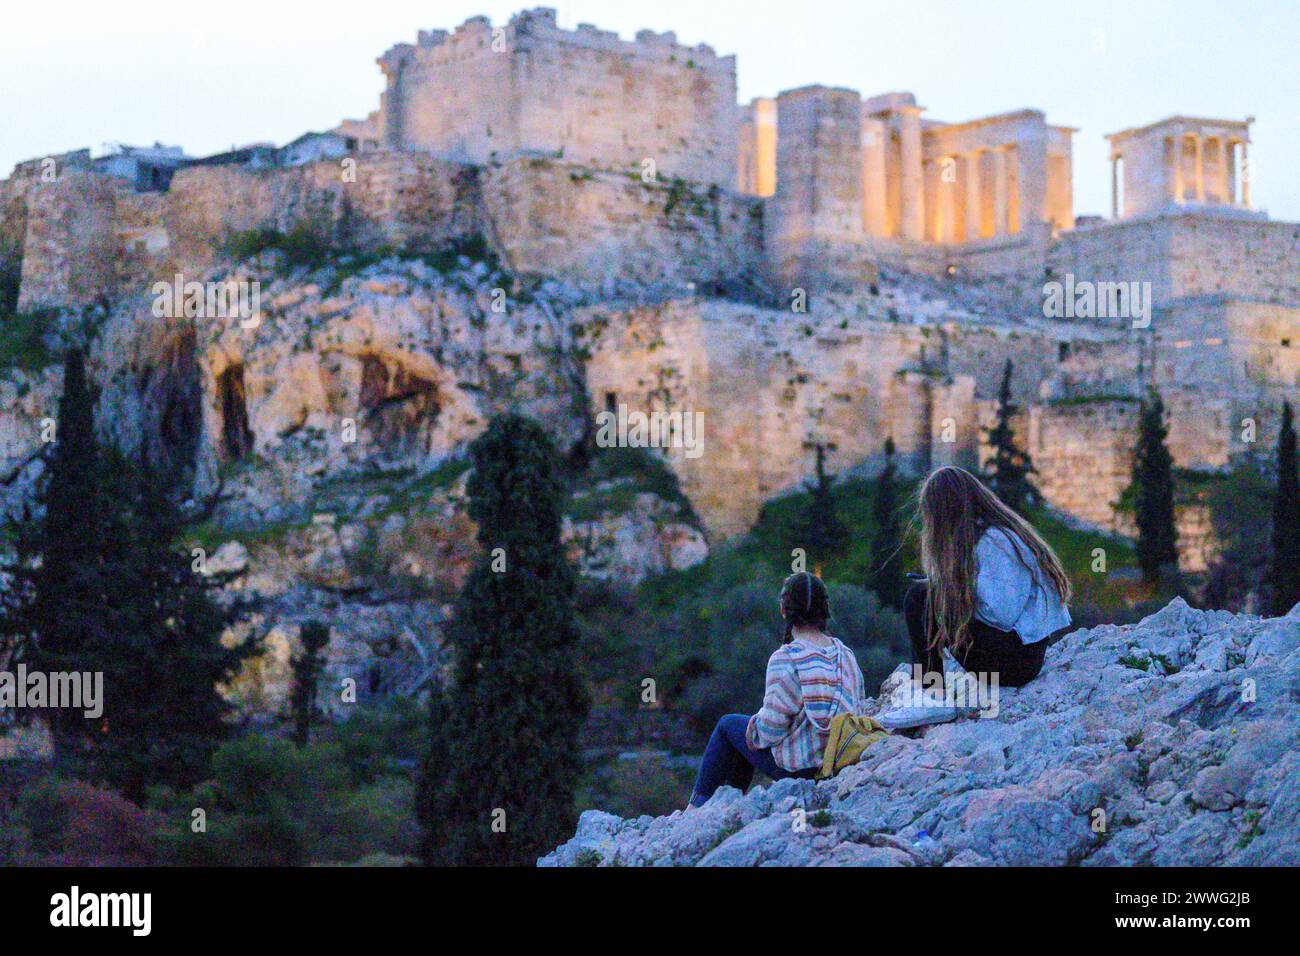 Two individuals seated on rocks, Acropolis in the background at sunset. Stock Photo